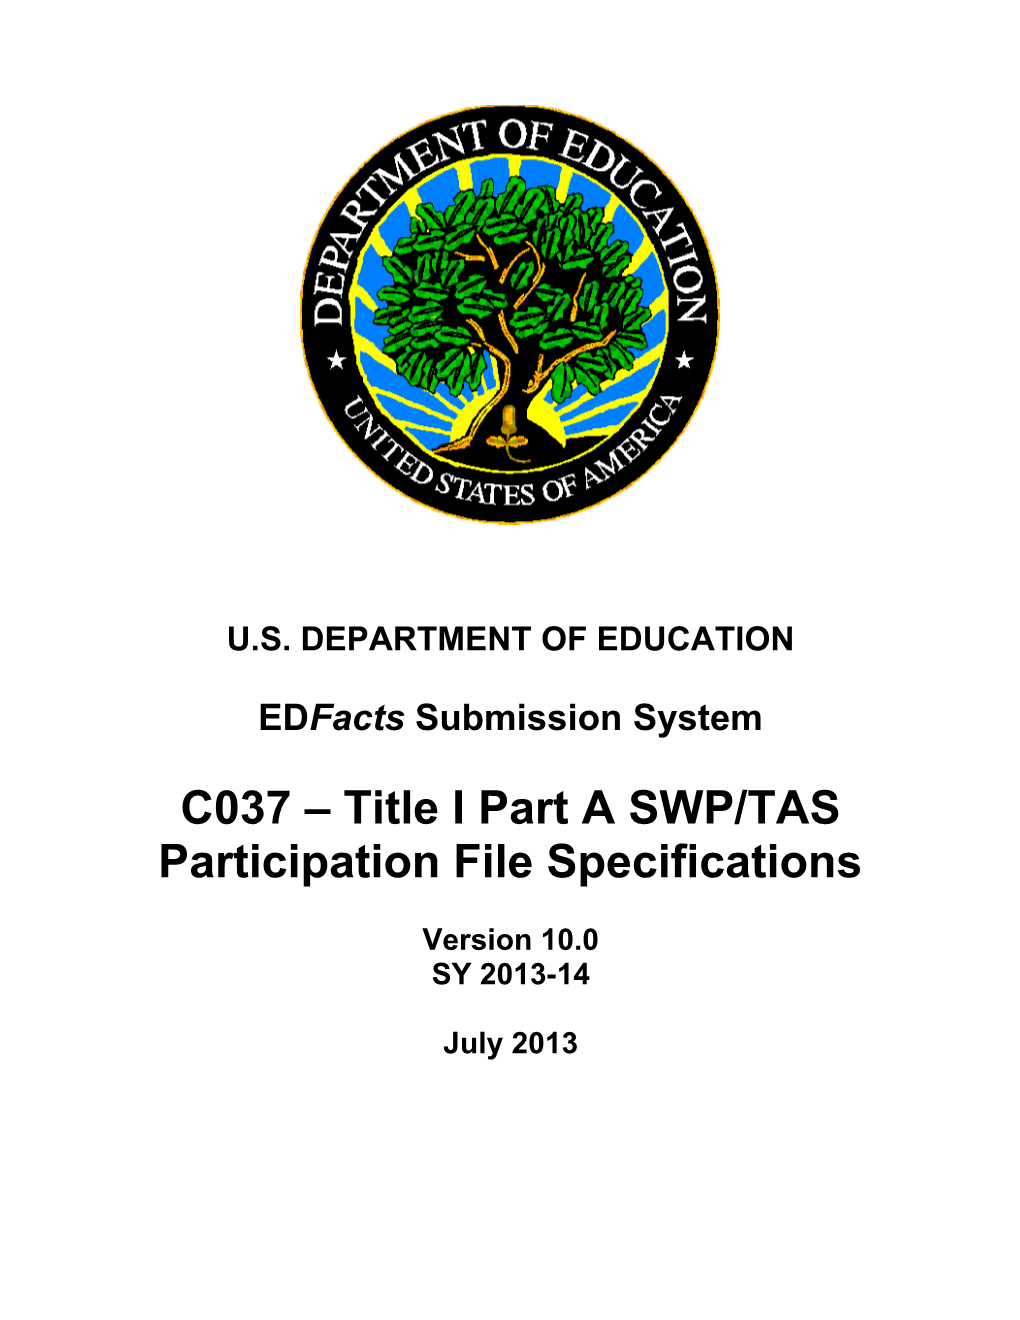 Title I SWP/TAS Participation File Specifications